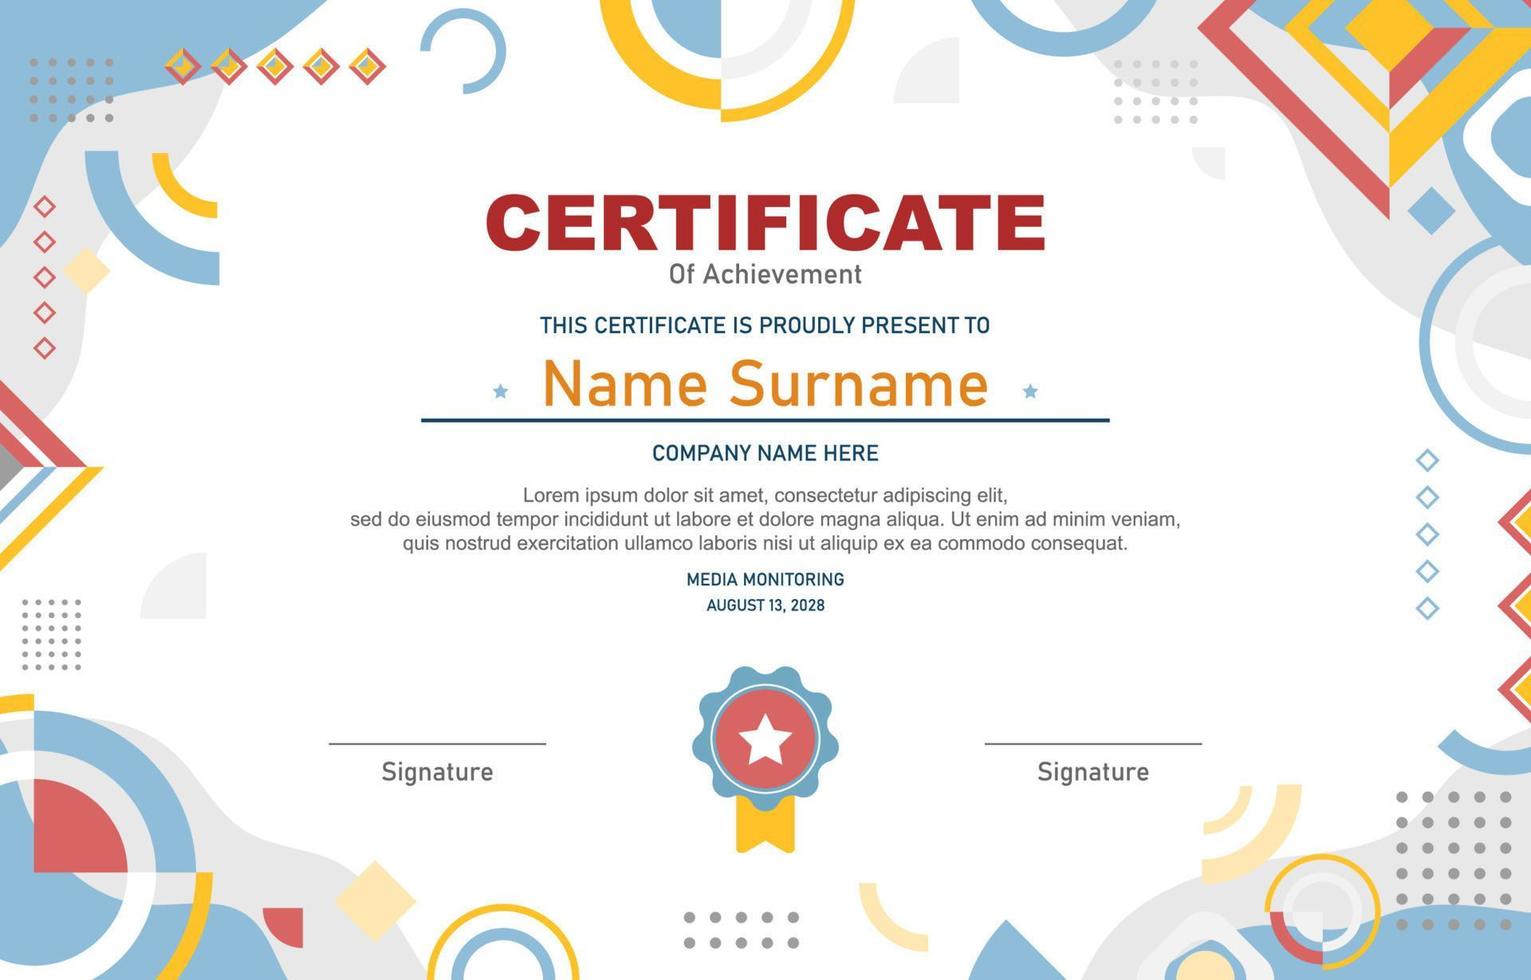 Certificate Design with Flat Modern Concept vector